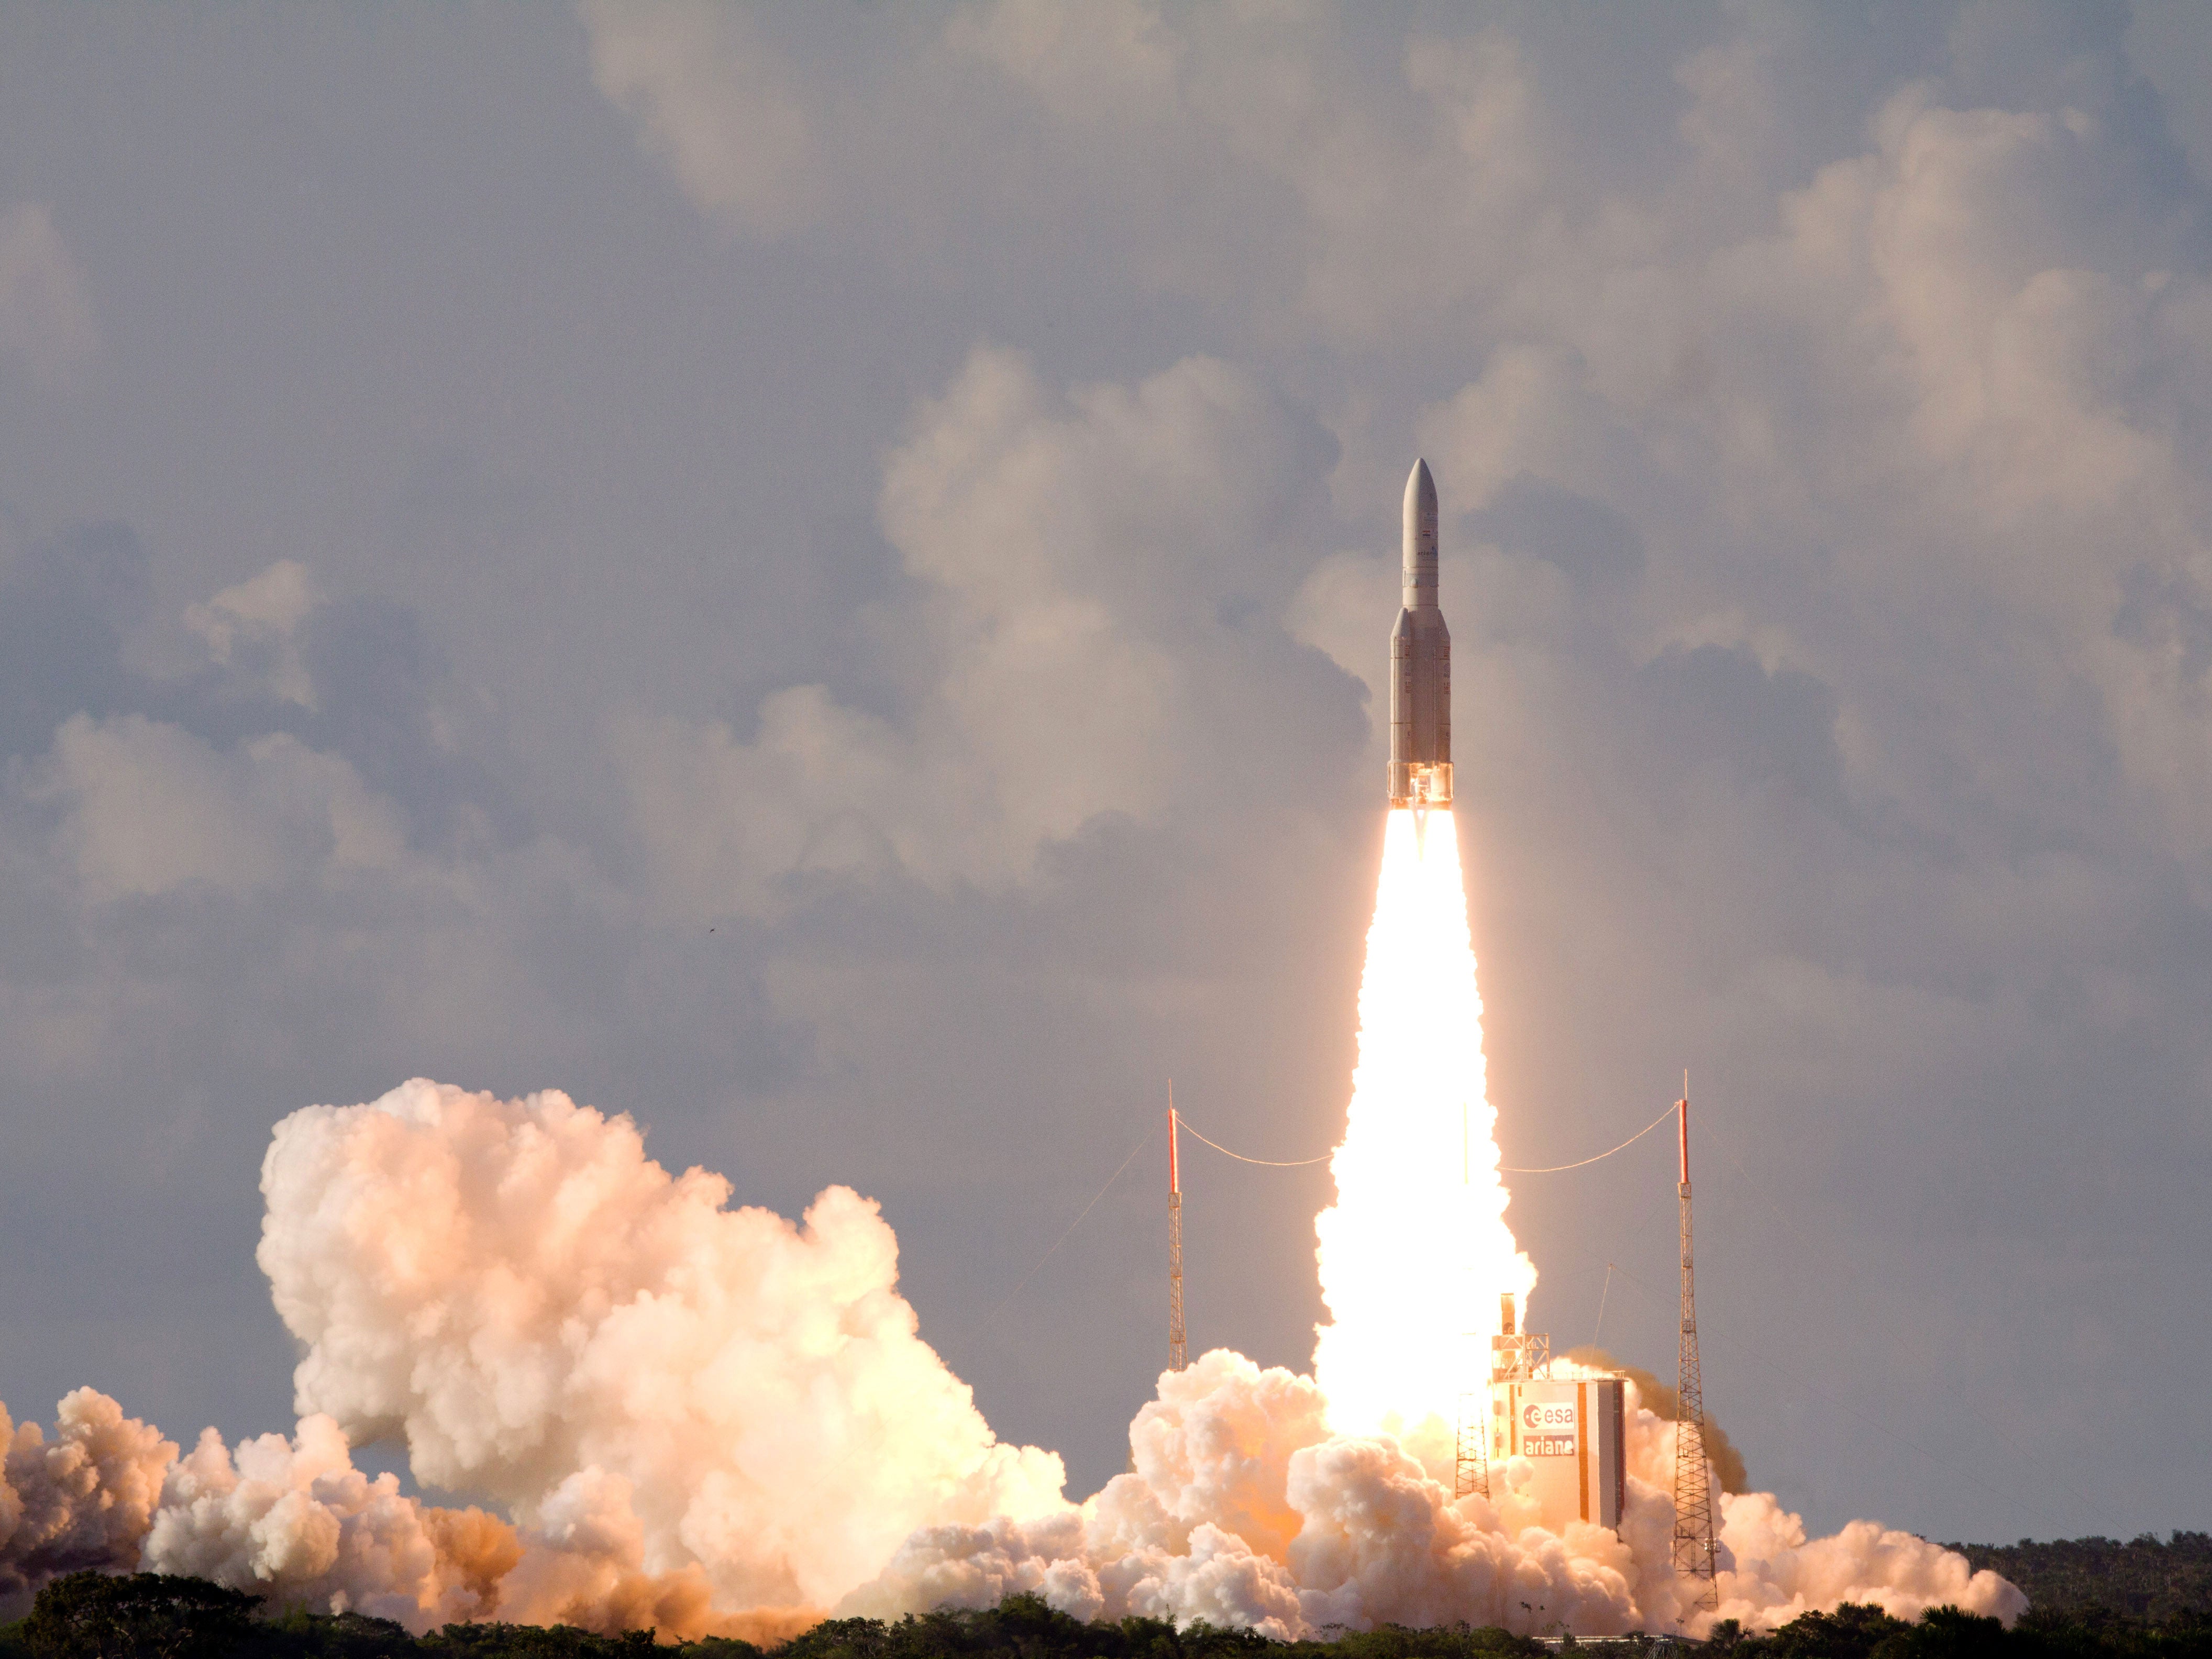 An Ariane-5 rocket, carrying two telecommunication satellites Eutelsat 25B/ Eshail1 (France/Qatar) and GSAT-7 (India) blasts off from the European space centre of Kourou, French Guiana on August 30, 2013